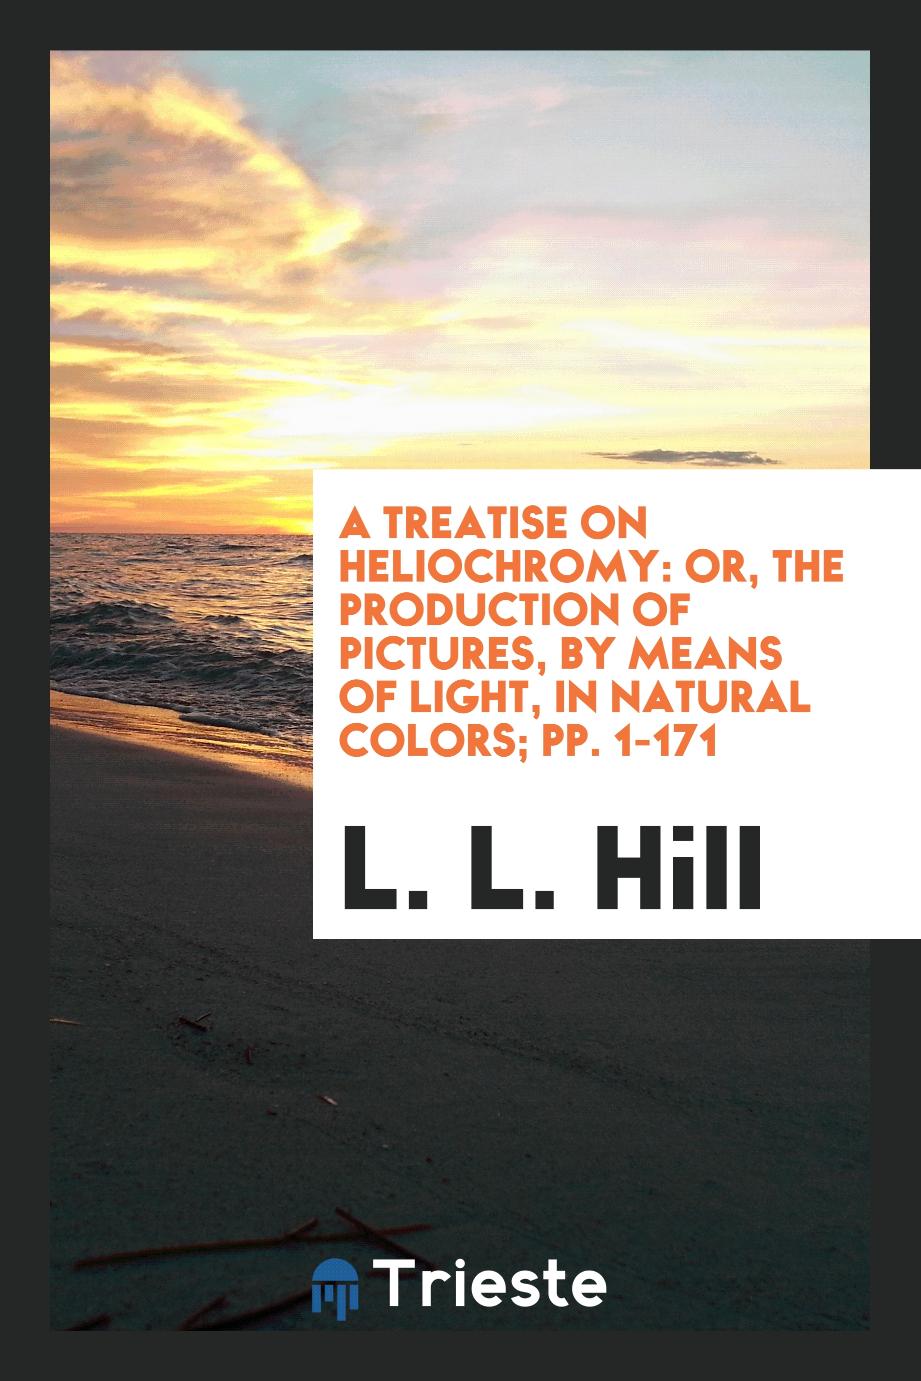 A Treatise on Heliochromy: Or, The Production of Pictures, by Means of Light, in Natural Colors; pp. 1-171